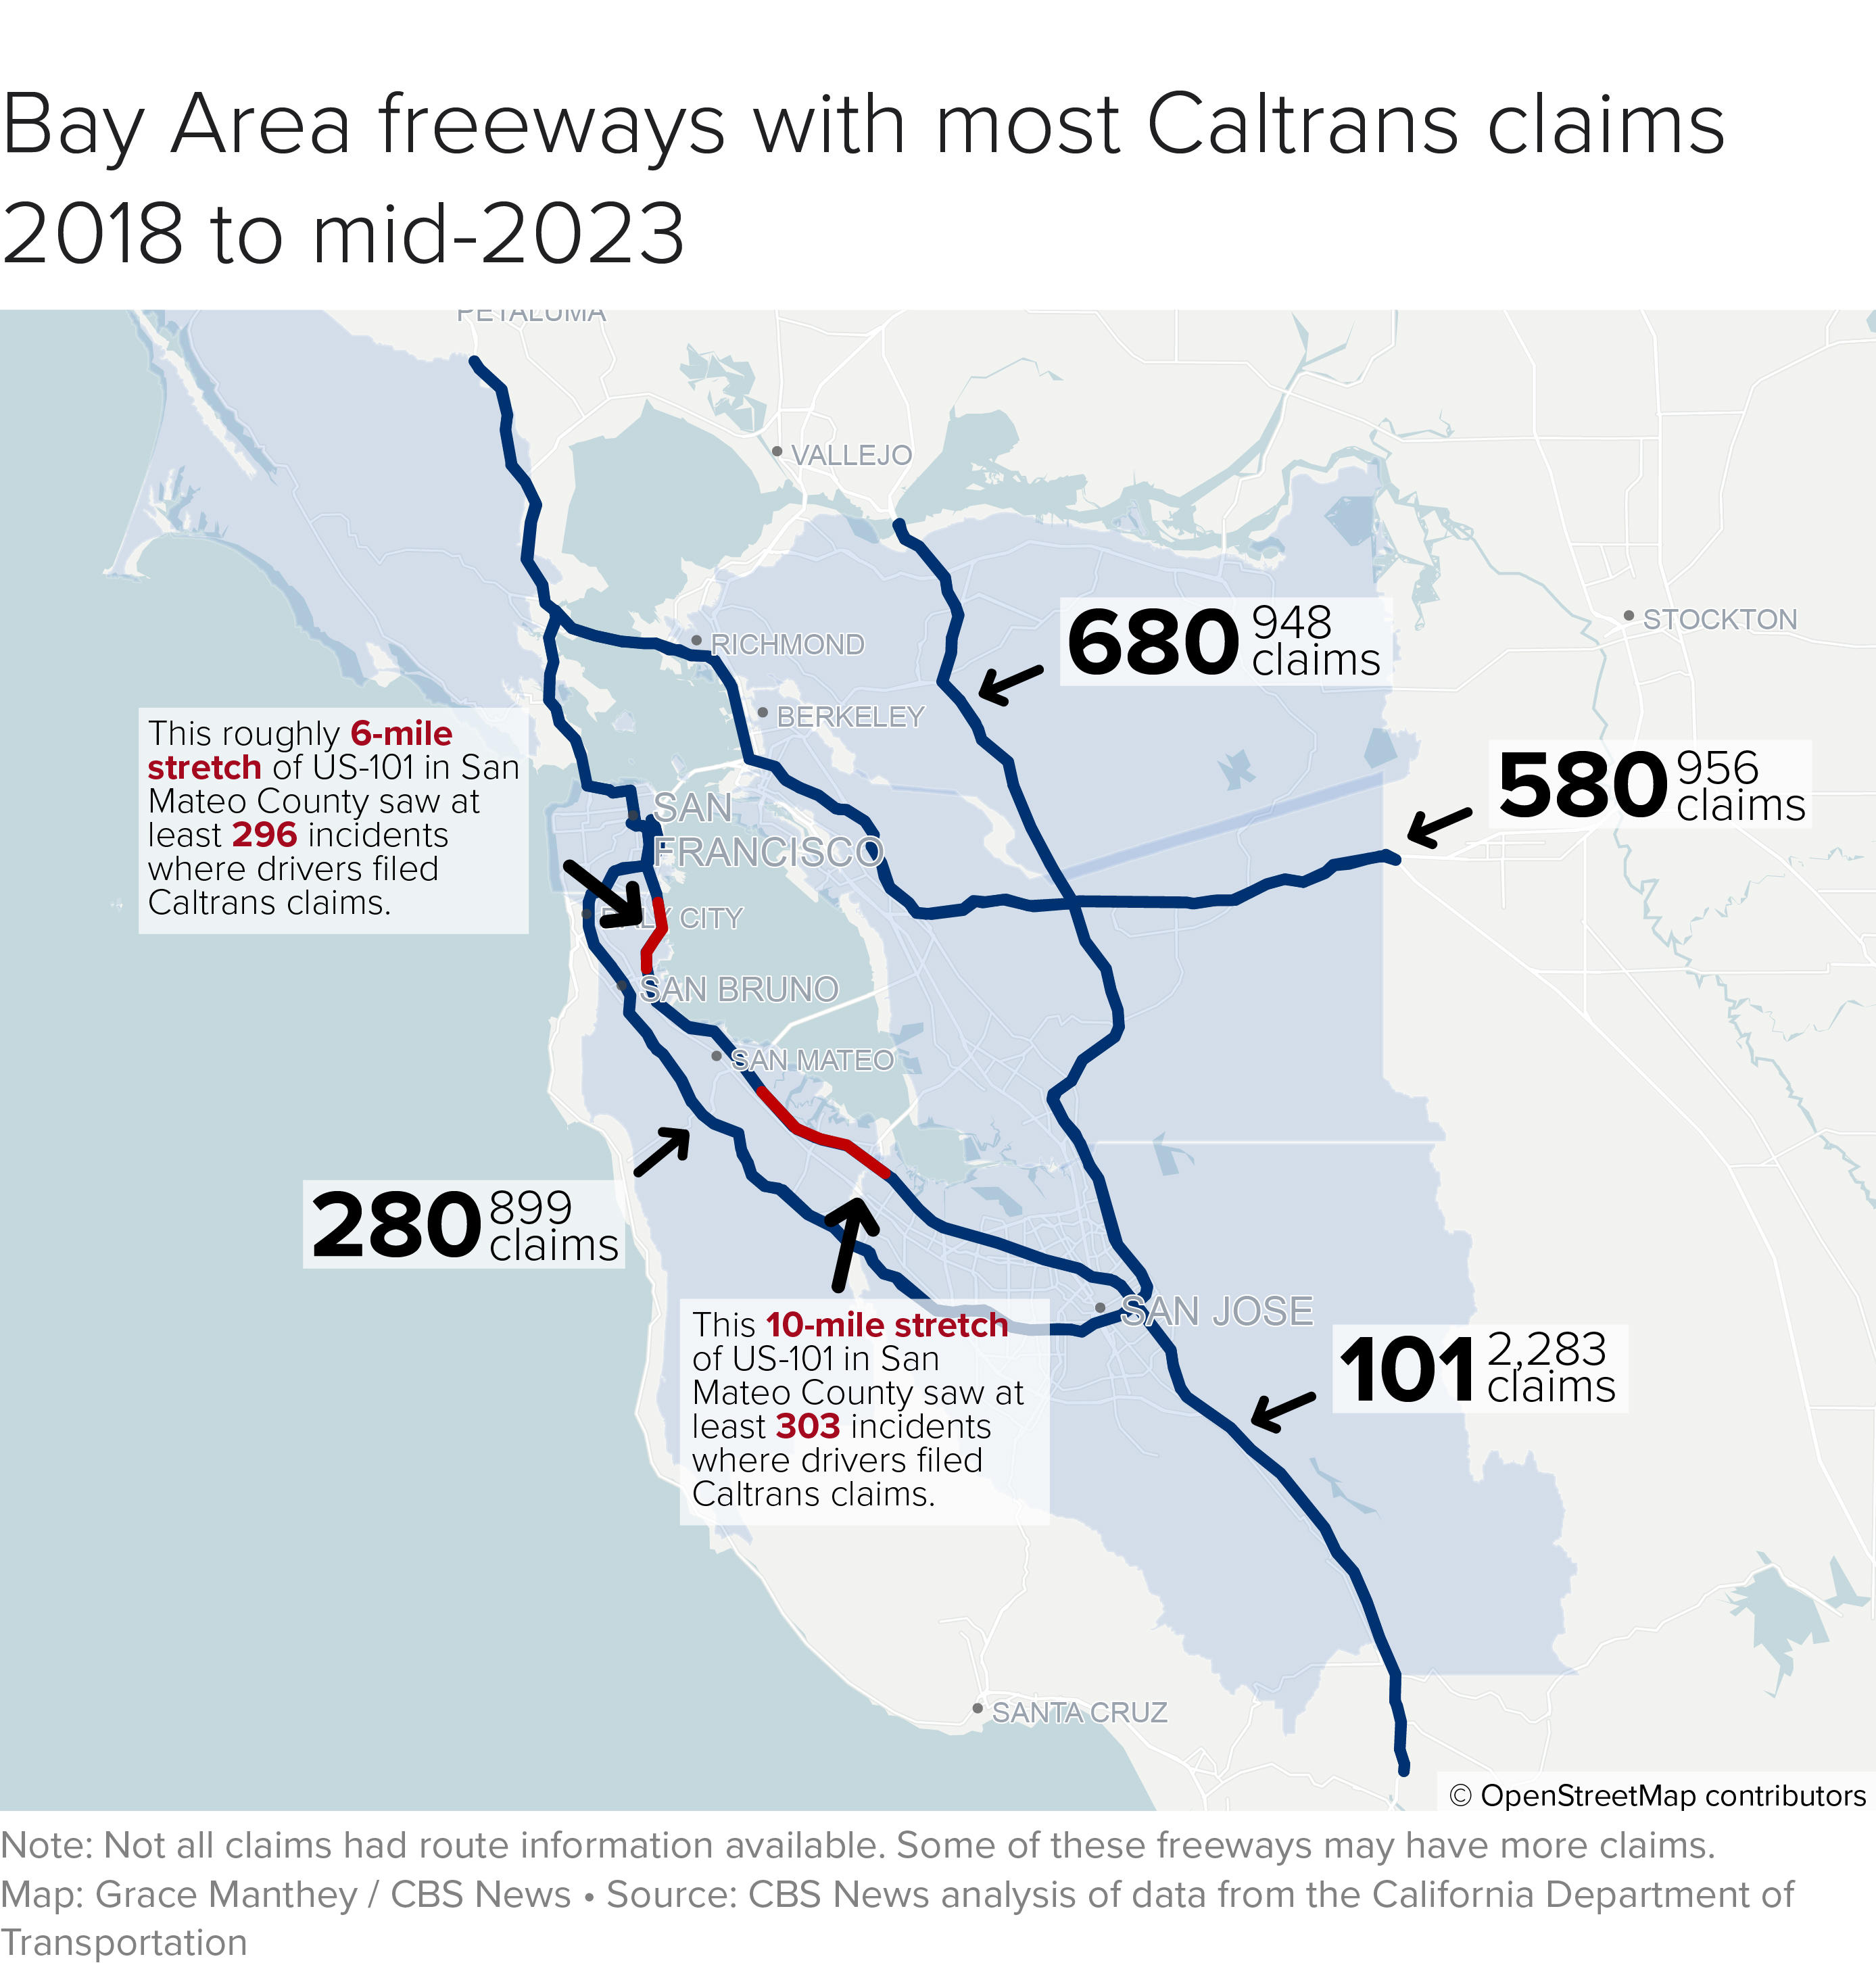 In the Bay Area, the 101 had the most incidents, resulting in claims of more than 2,000.  Most incidents on the 101 occurred between East Palo Alto and the Redwood Coast, South San Francisco and Brisbane and within 10 miles of San Jose Airport through Mountain View.  There were also many claims on 580 and 680 and 280. 